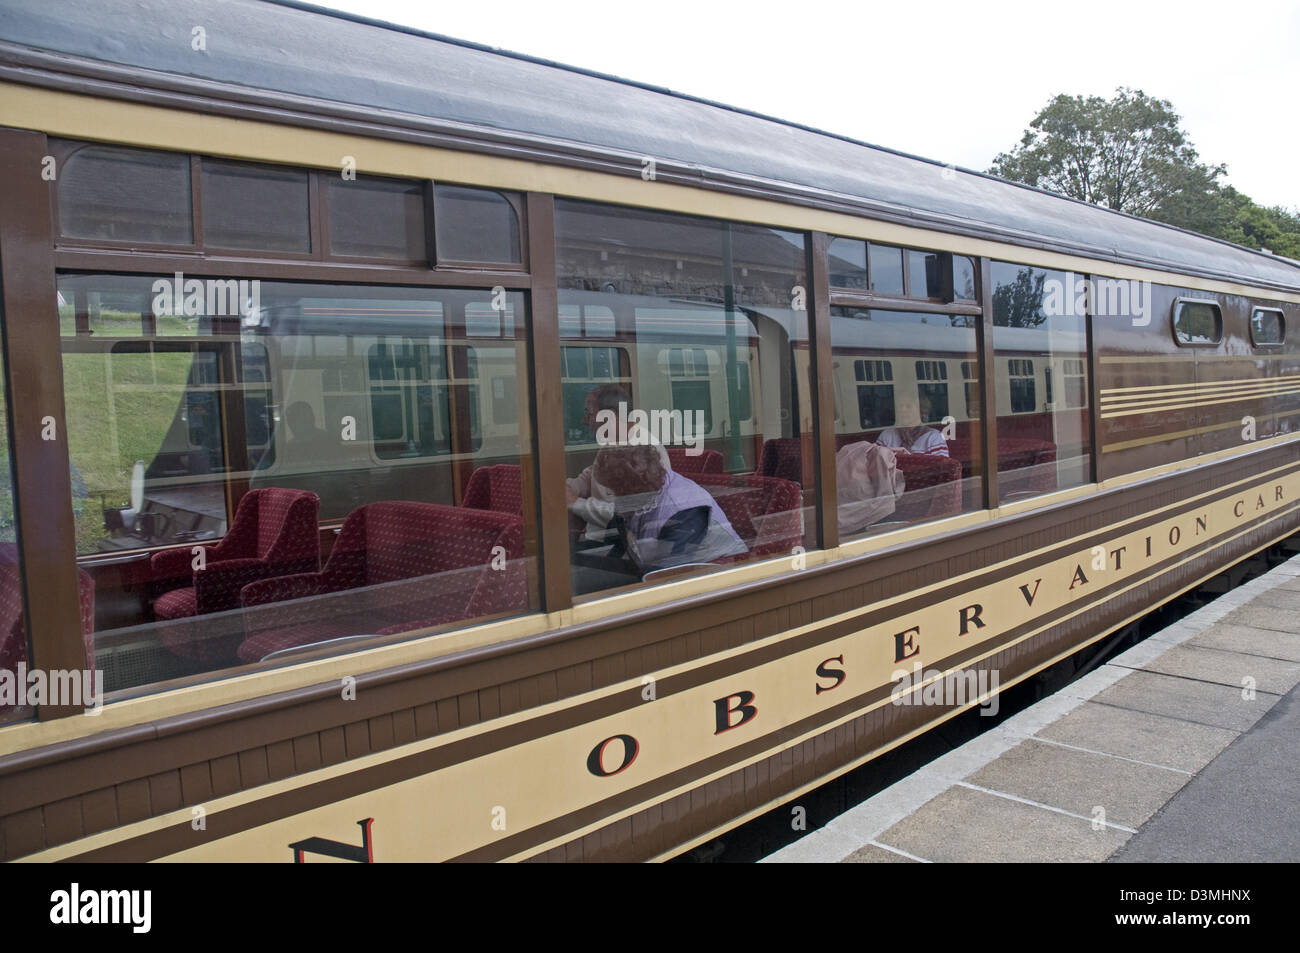 Pullman LBSCR 114 Observation CAR No.14 at Swanage station Stock Photo